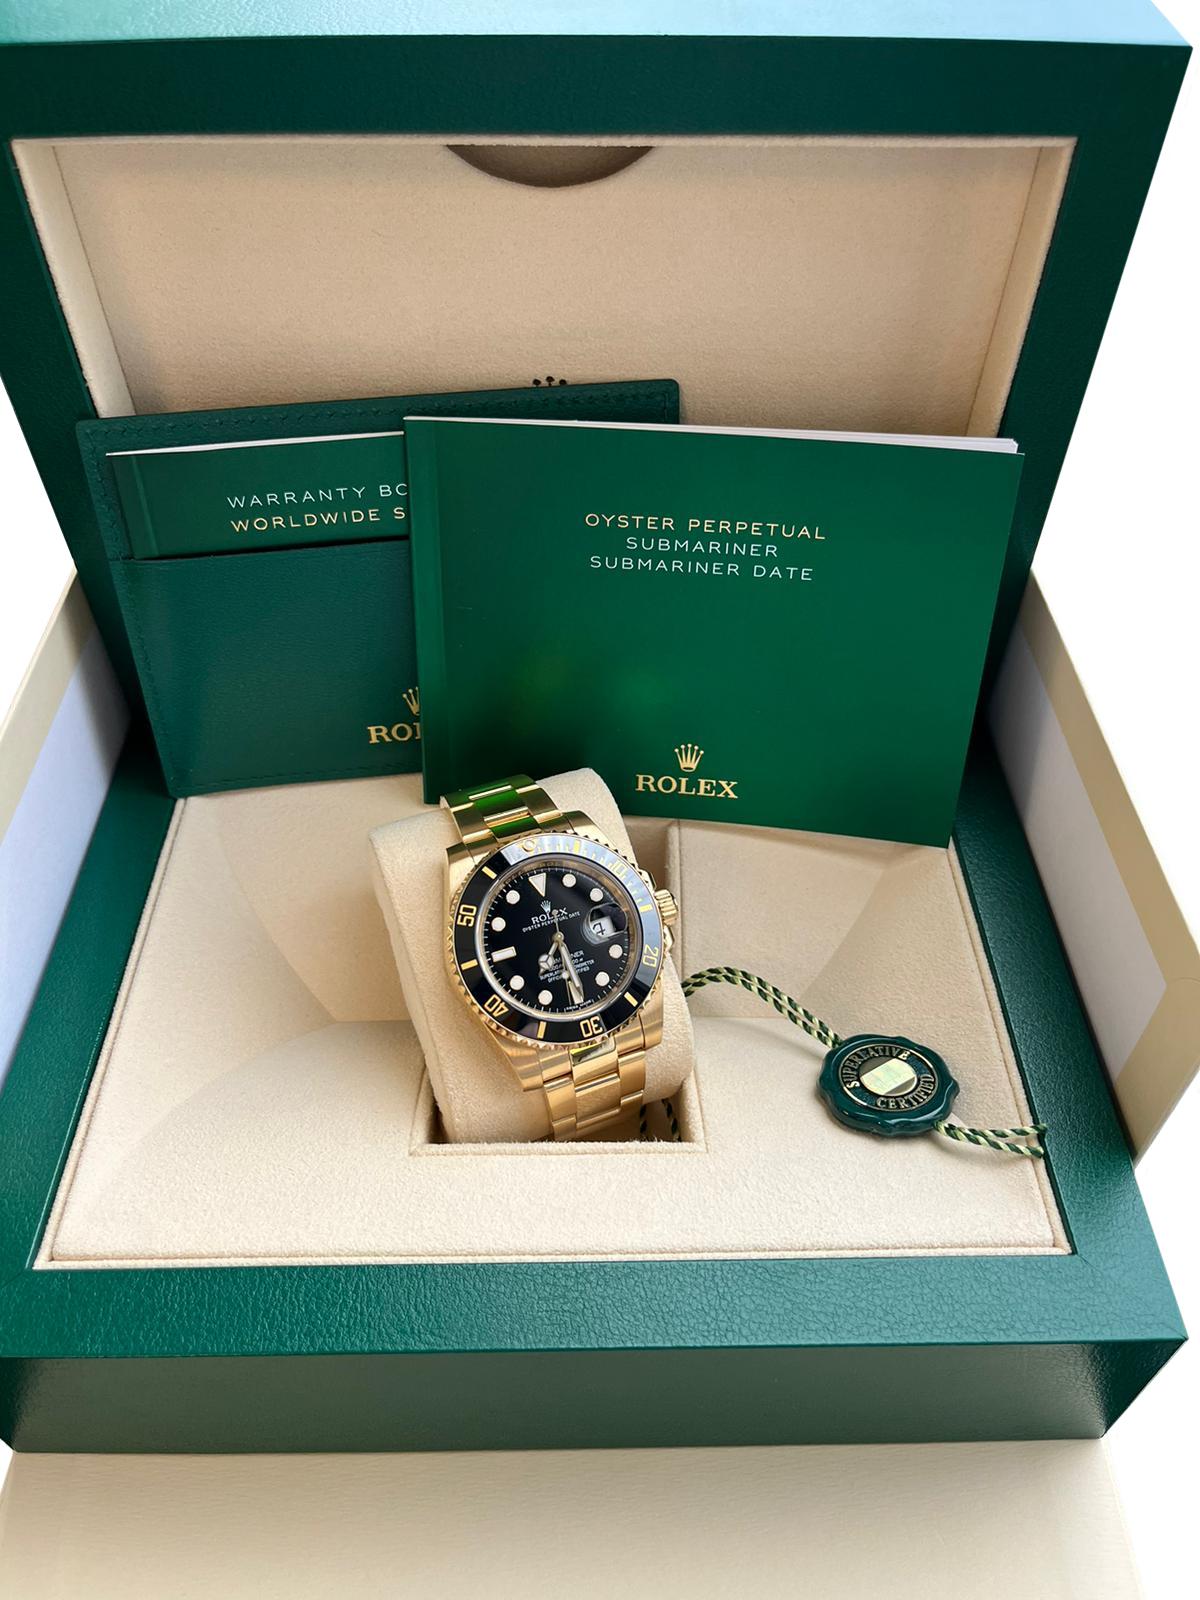 The Rolex Submariner Date is designed with a 40mm 18-carat yellow gold case with oyster architecture and a rotating black ceramic bezel. The rich black dial features a date display and luminescent hour markers and hands which makes it legible